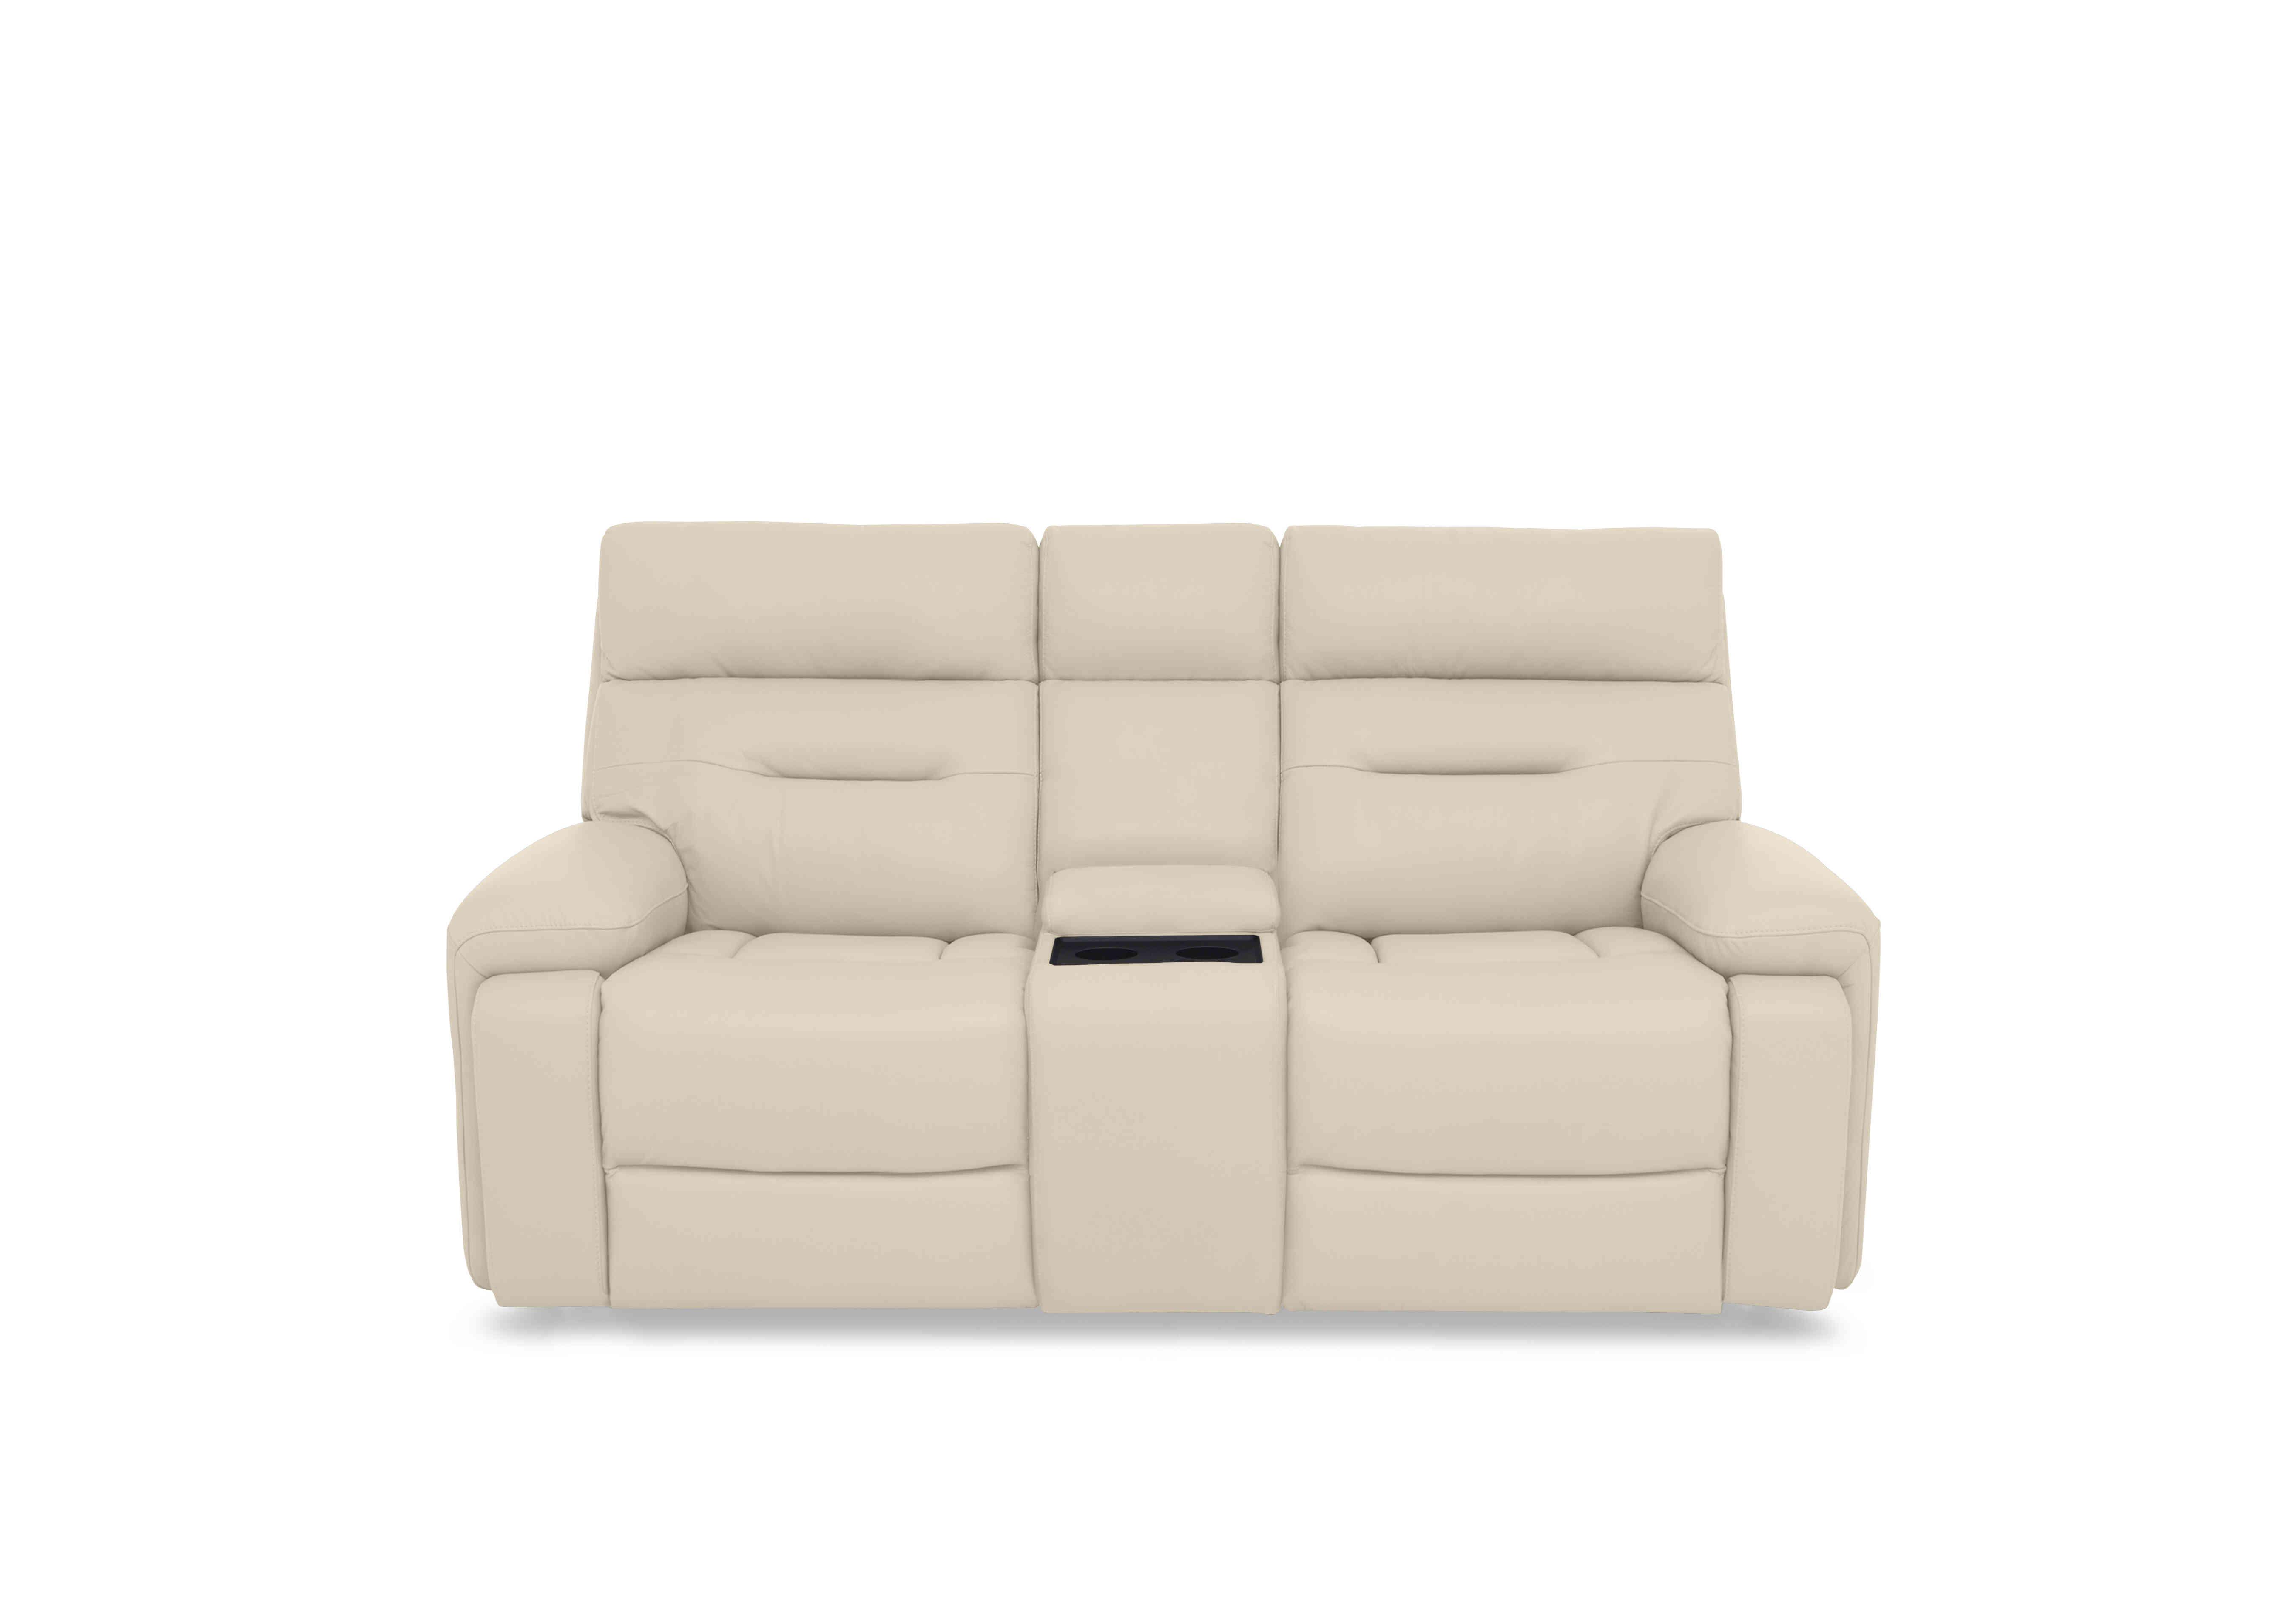 Cinemax Media 2 Seater Leather Power Recliner Sofa with Power Headrests in Lx-6407 Stone on Furniture Village